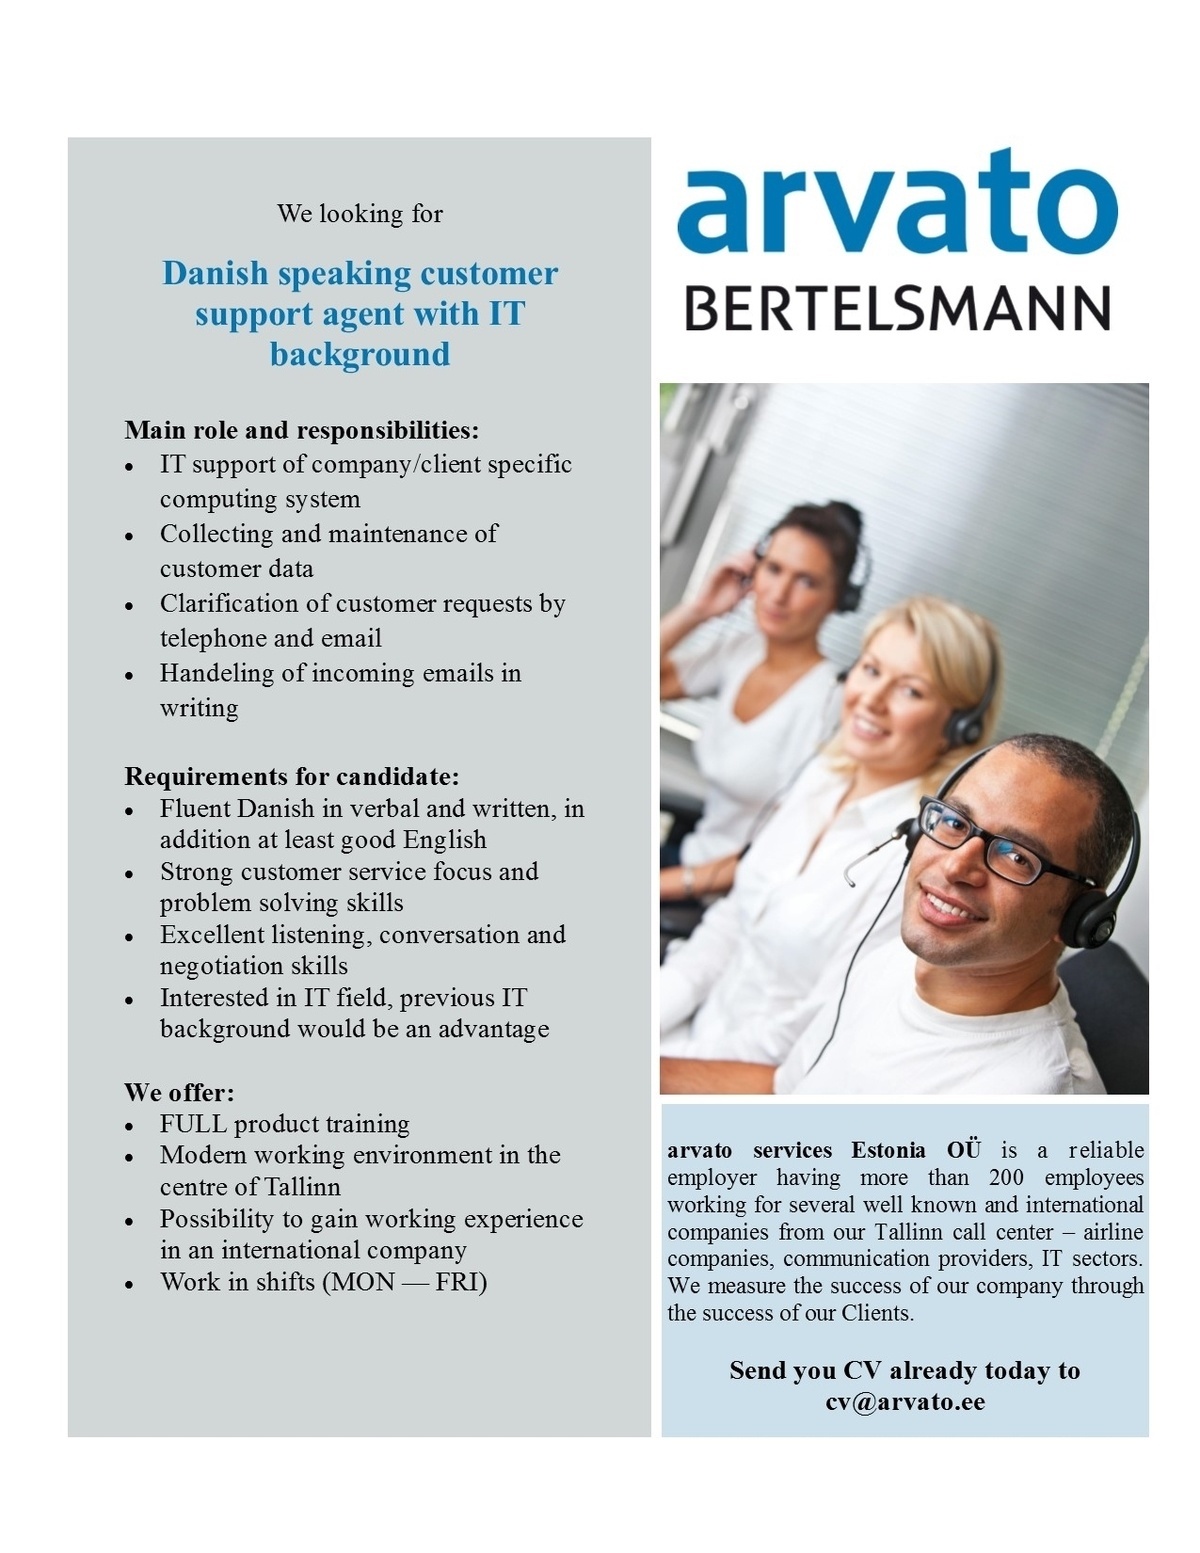 Arvato Services Estonia OÜ Danish speaking Customer Support Agent with IT background